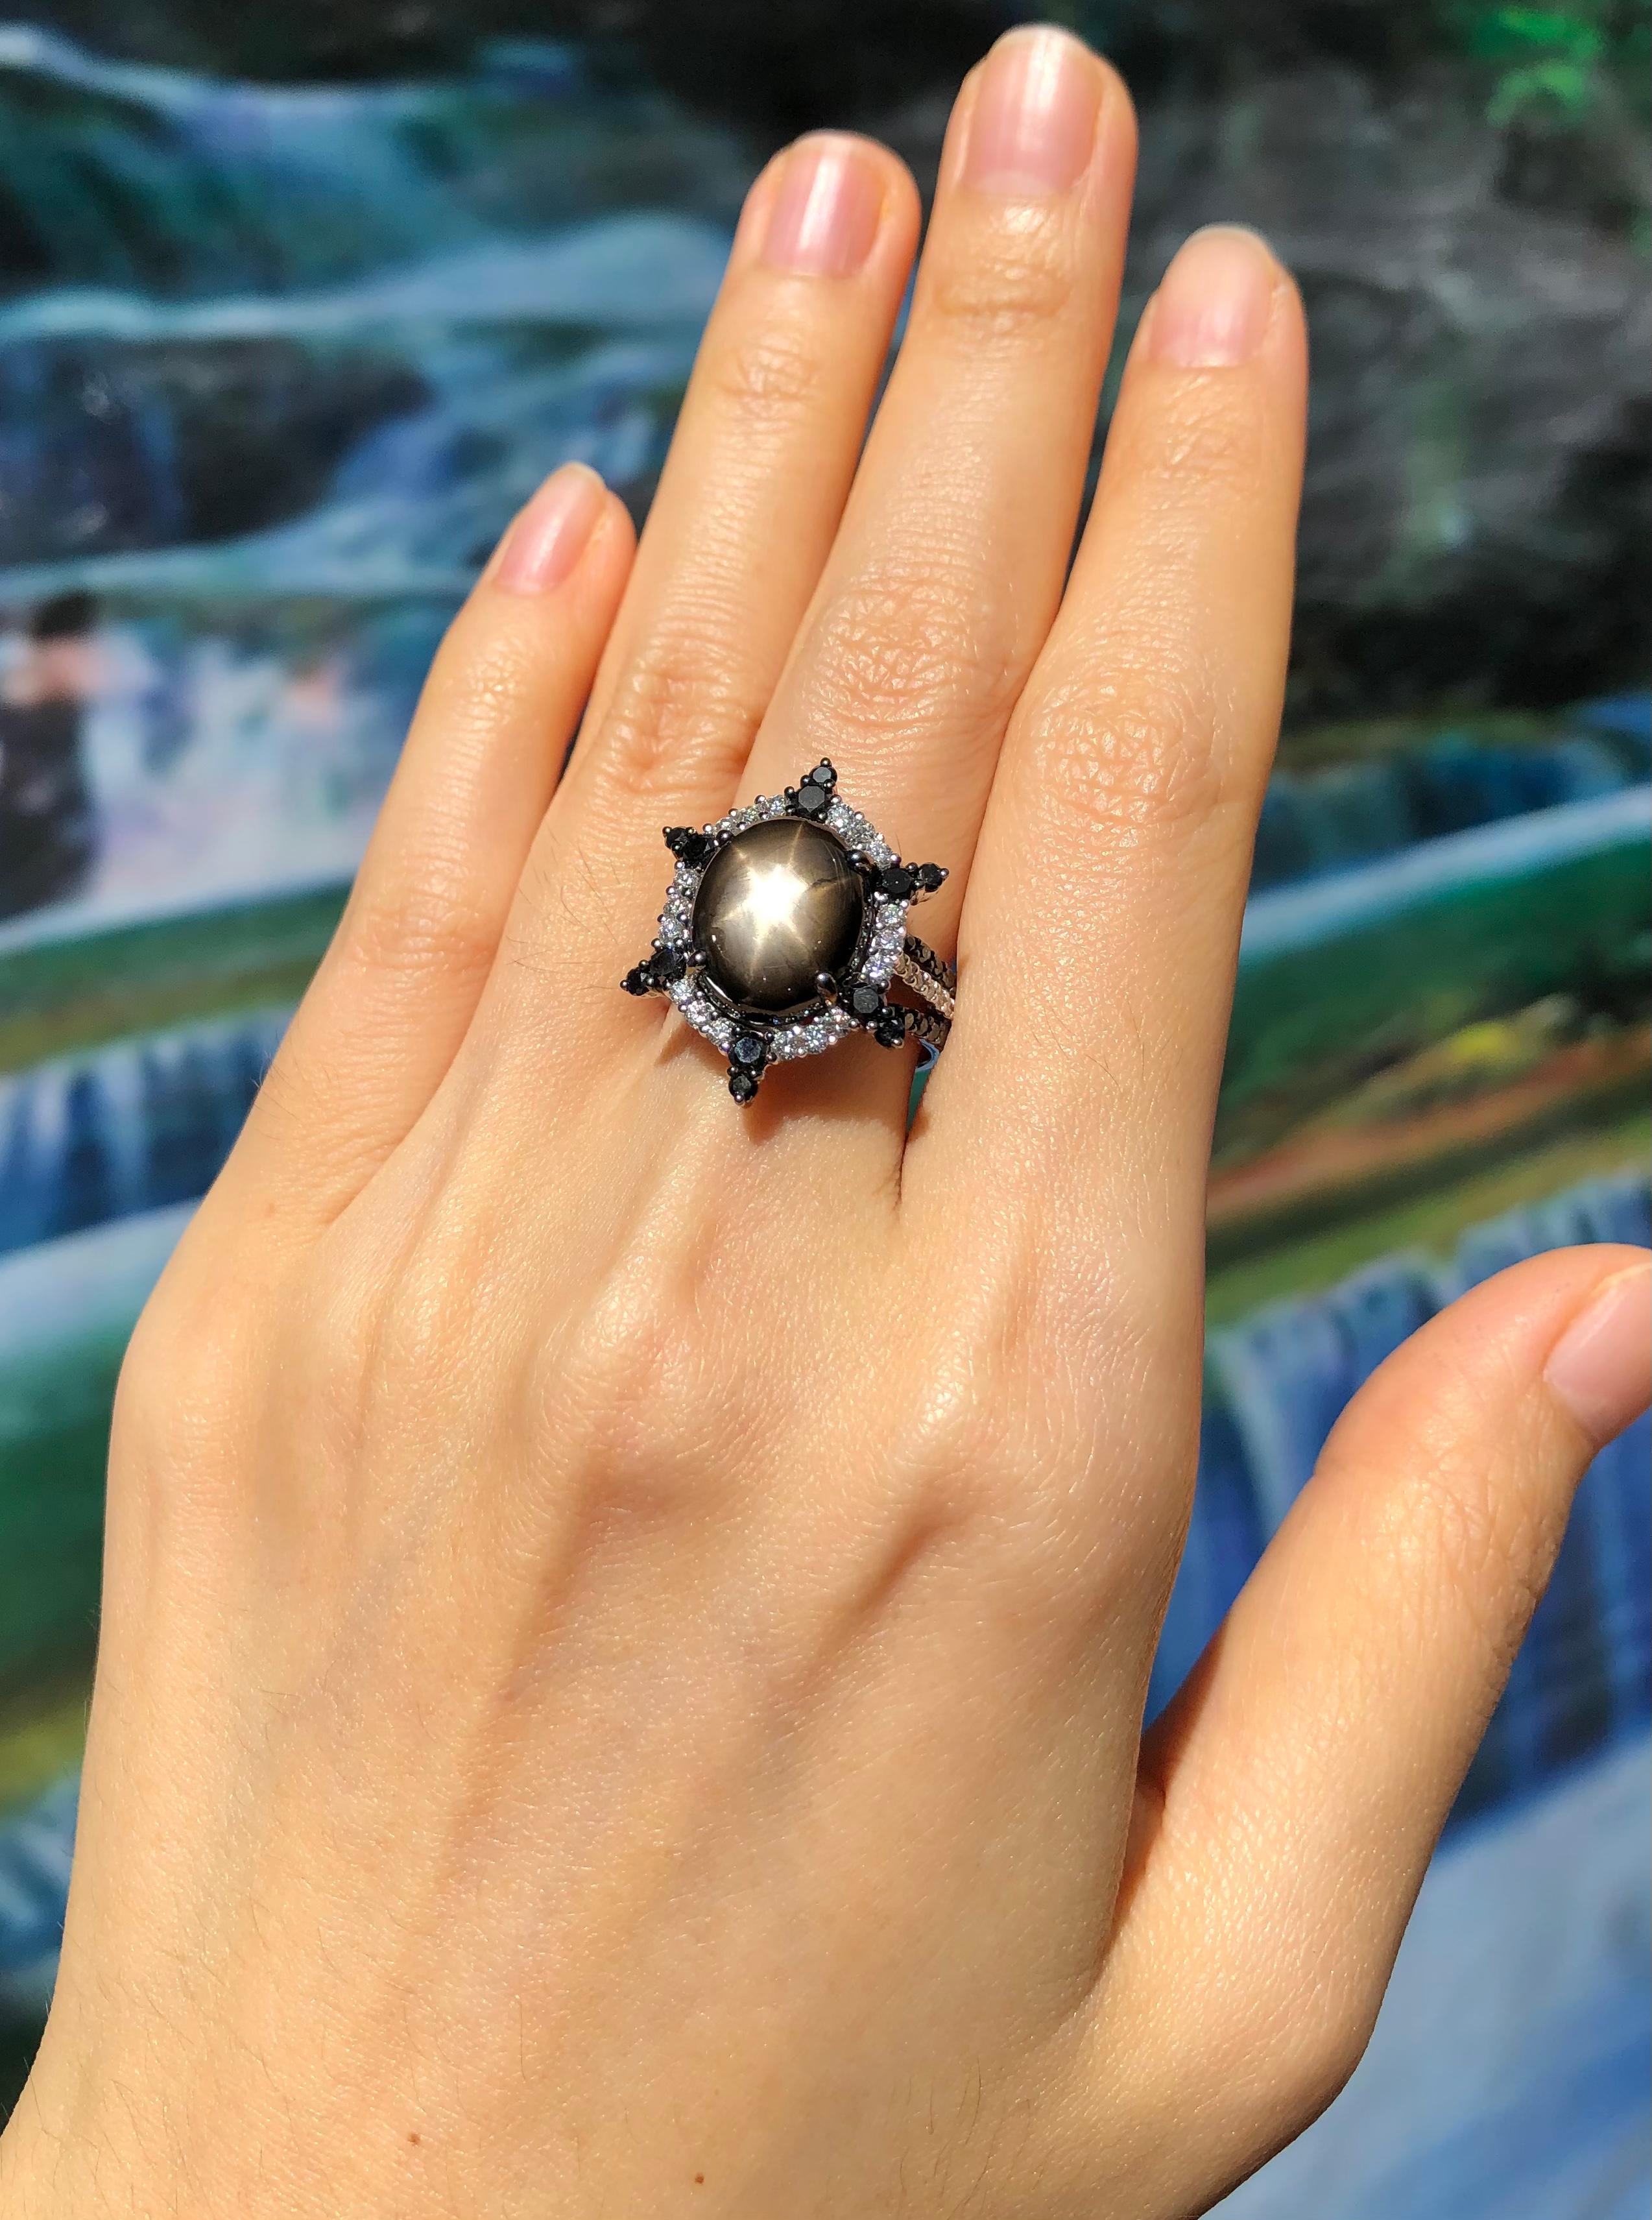 Black Star Sapphire 10.49 carats with Diamond 0.45 carat and Black Diamond 0.88 carat Ring set in 18 Karat White Gold Settings

Width:  1.8 cm 
Length: 2.4 cm
Ring Size: 54
Total Weight: 10.53 grams

